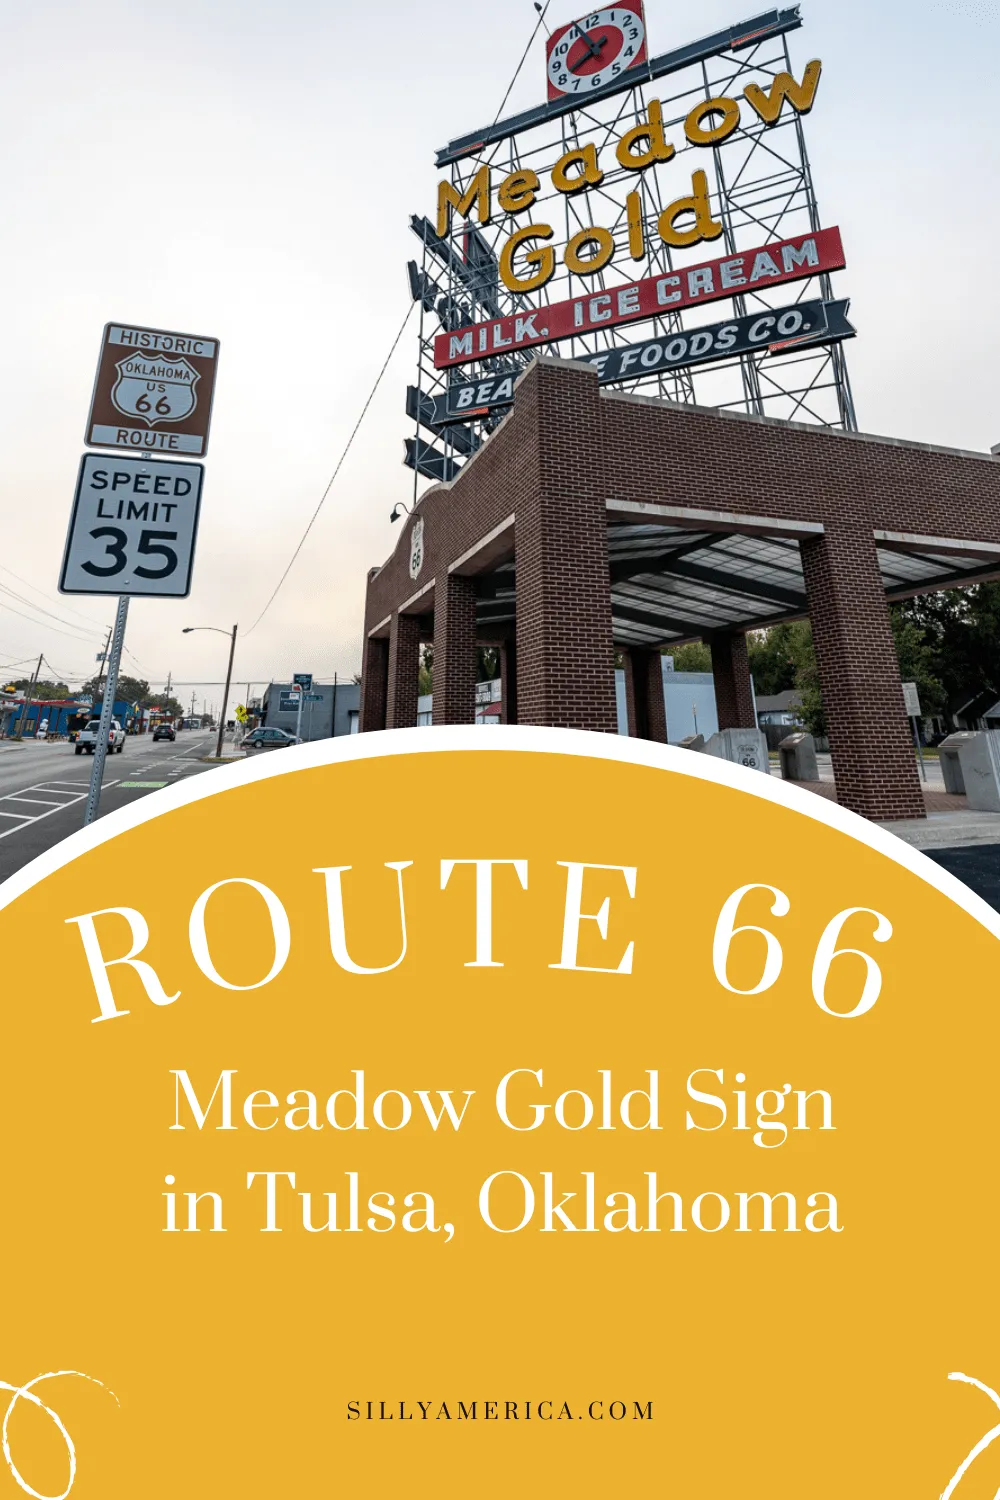 Bright neon lights are a signature sight on Route 66. When you think of neon you probably think of motels and service stations. But do you also think of milk? You should, because the Meadow Gold Sign in Tulsa, Oklahoma is a Route 66 landmark. Add this roadside attraction to your travel bucket list.  #RoadTrips #RoadTripStop #Route66 #Route66RoadTrip #OklahomaRoute66 #Oklahoma #OklahomaRoadTrip #OklahomaRoadsideAttractions #RoadsideAttractions #RoadsideAttraction #RoadsideAmerica #RoadTrip